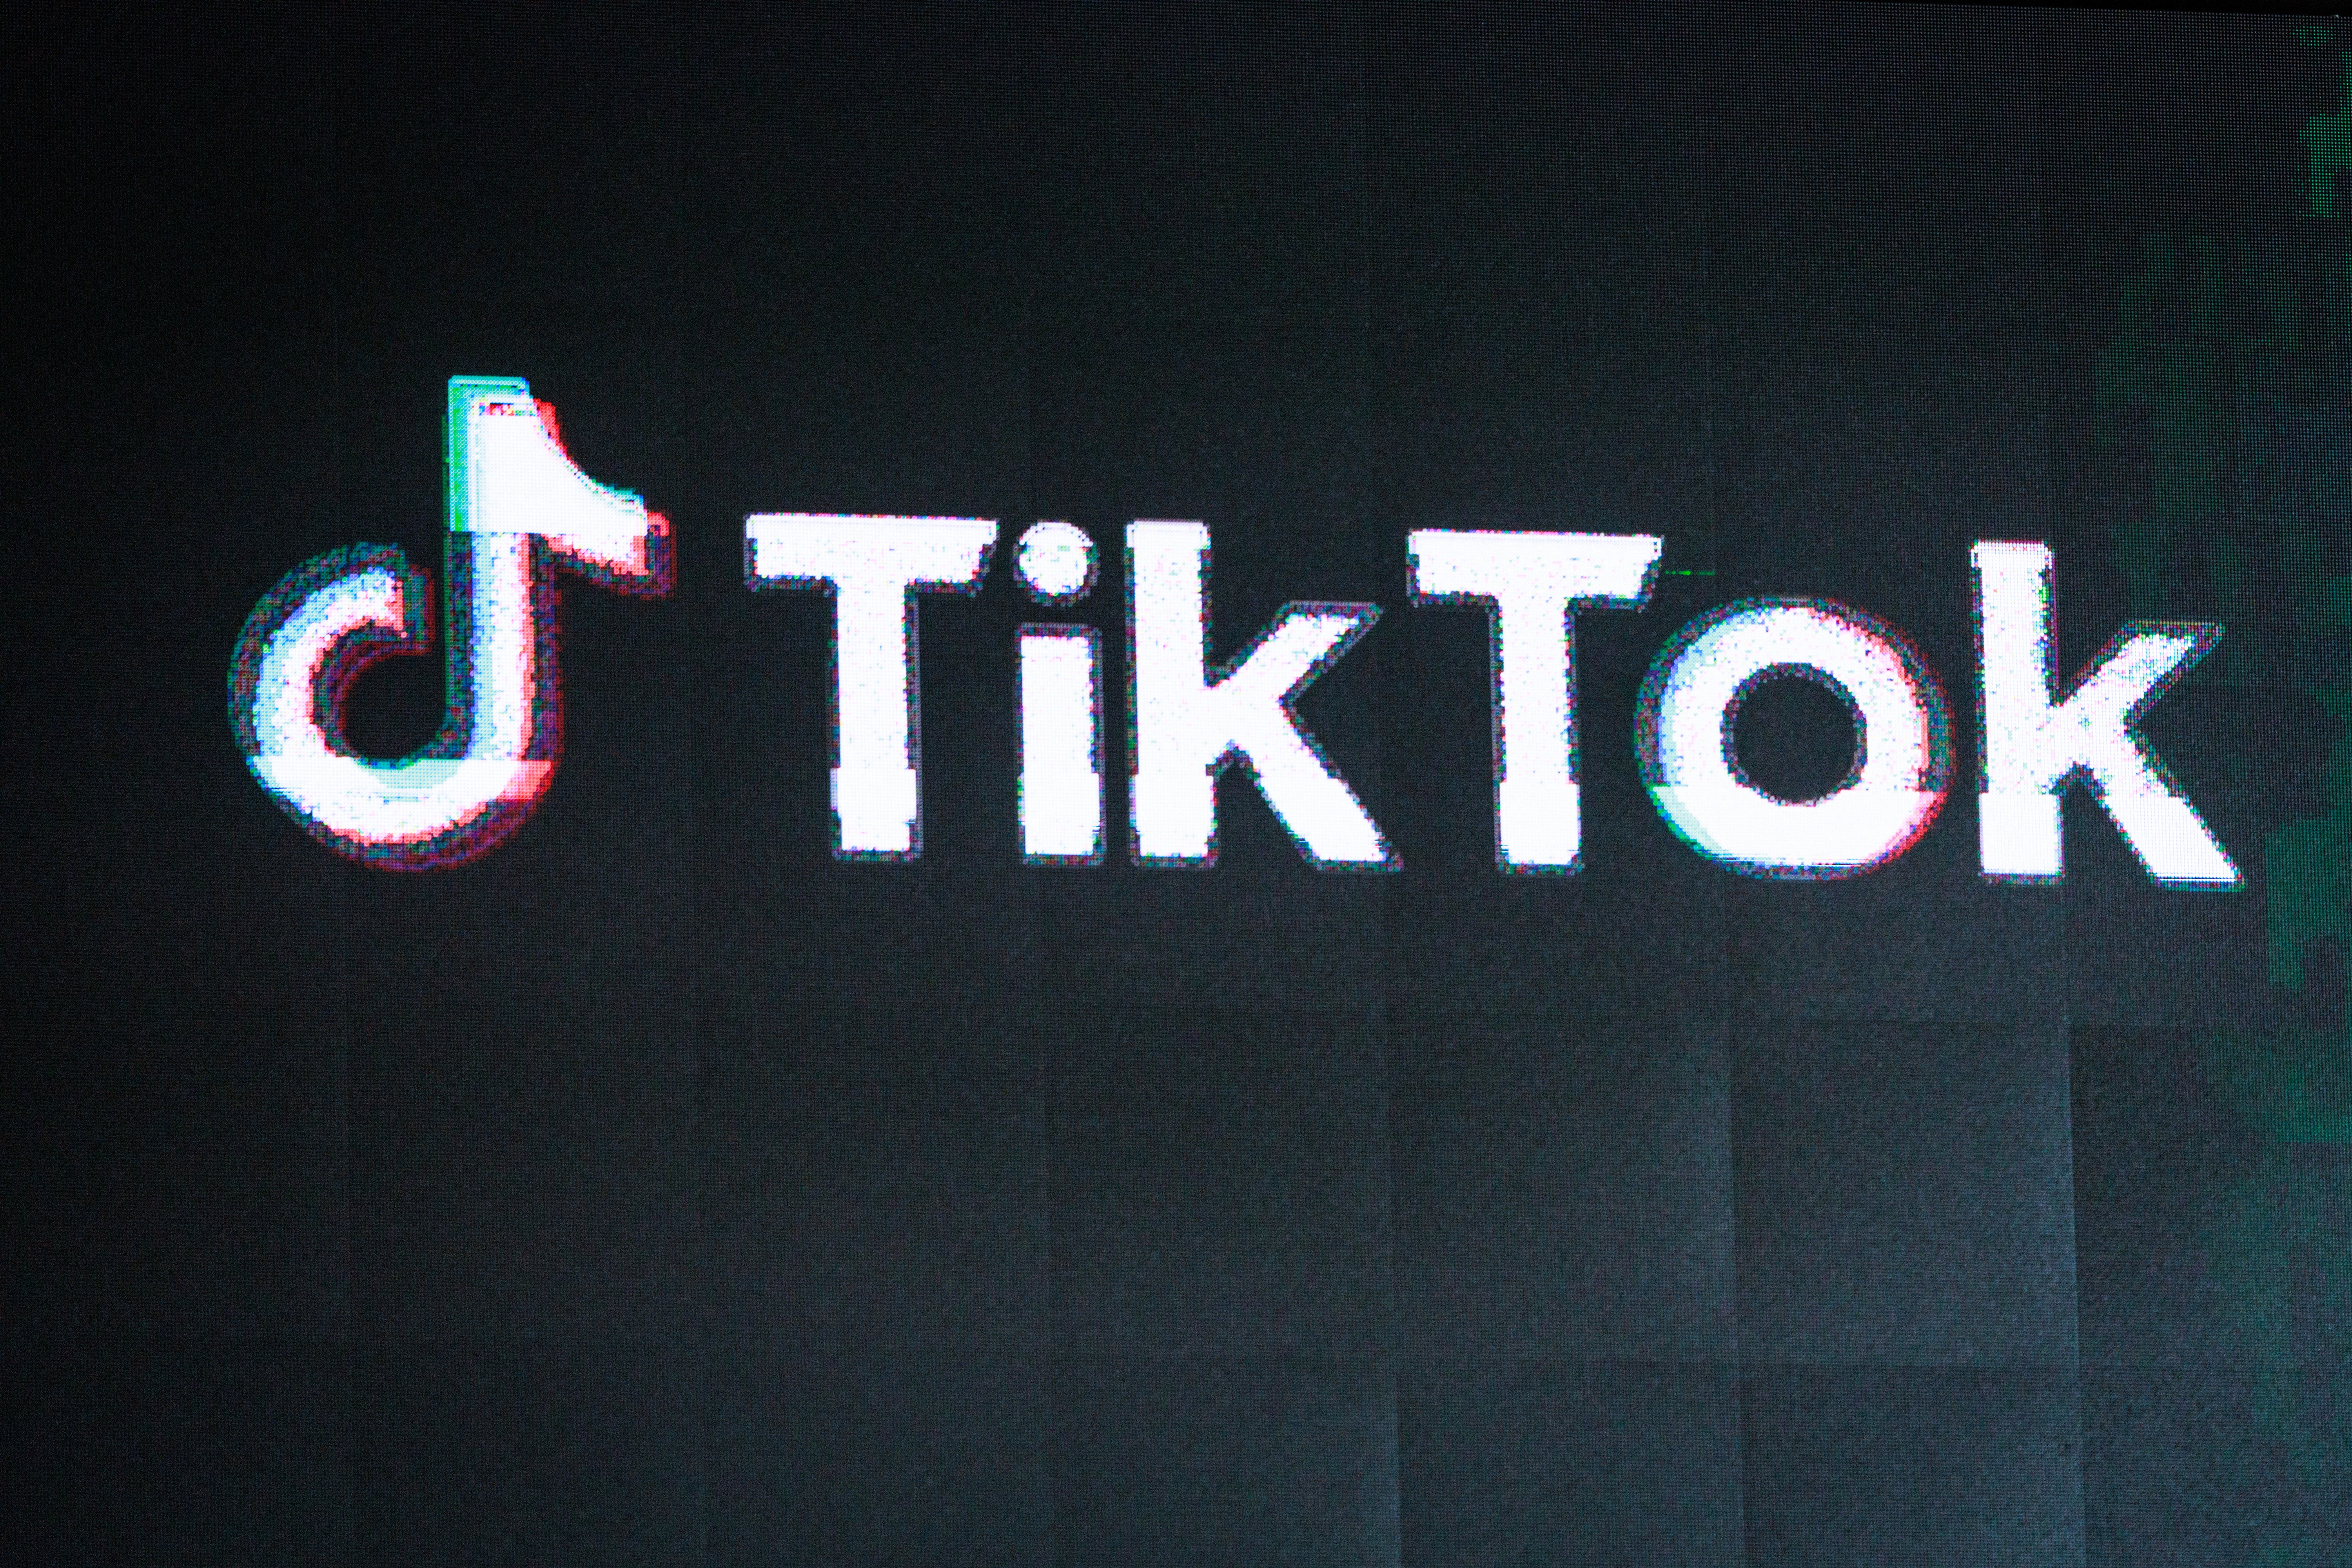 TikTok is one of the most popular apps in the US, amassing more than 170 million users in the country since launching in September 2017